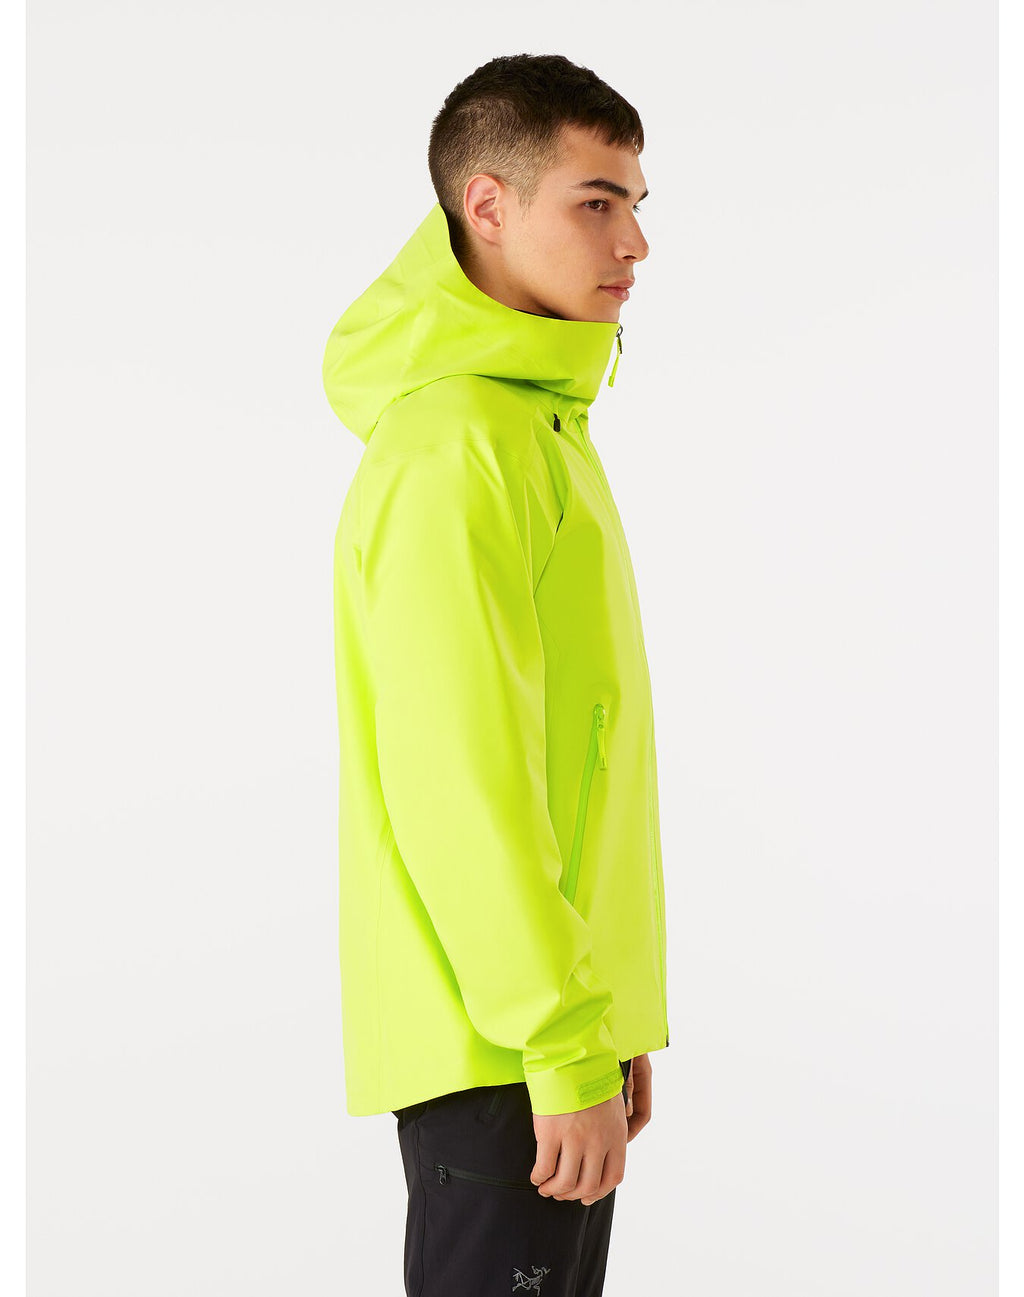 Beta-LT-Jacket-Offlime-Side-View-Right_1024x